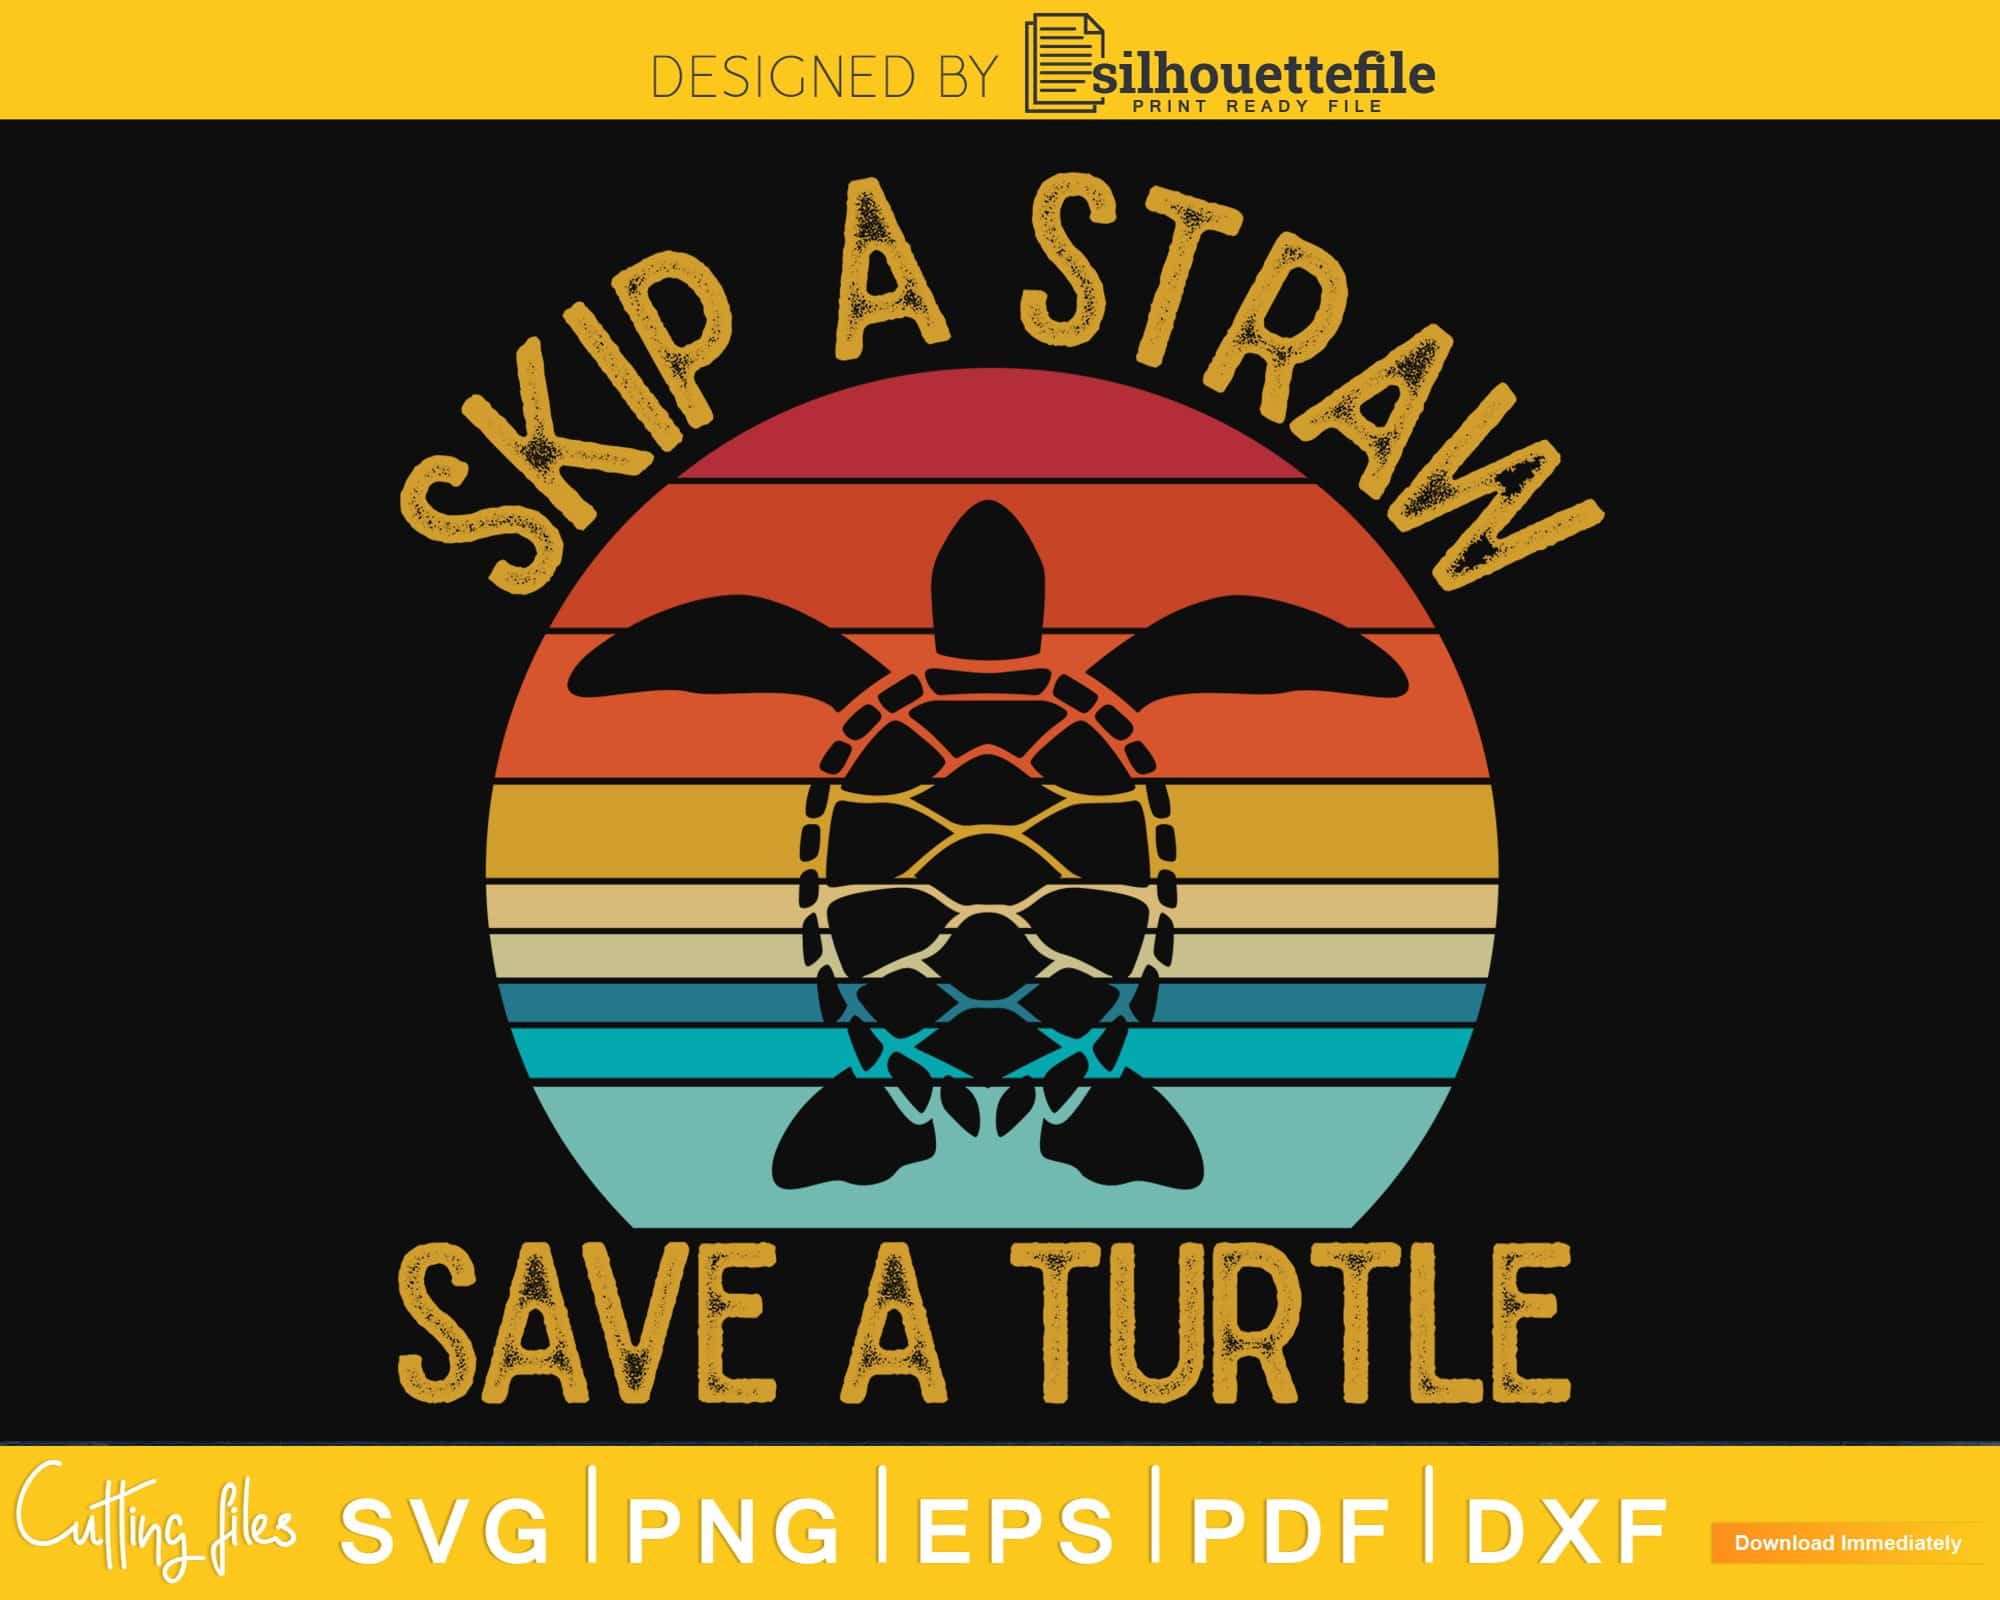 Skip a Straw Save a Turtle Poster